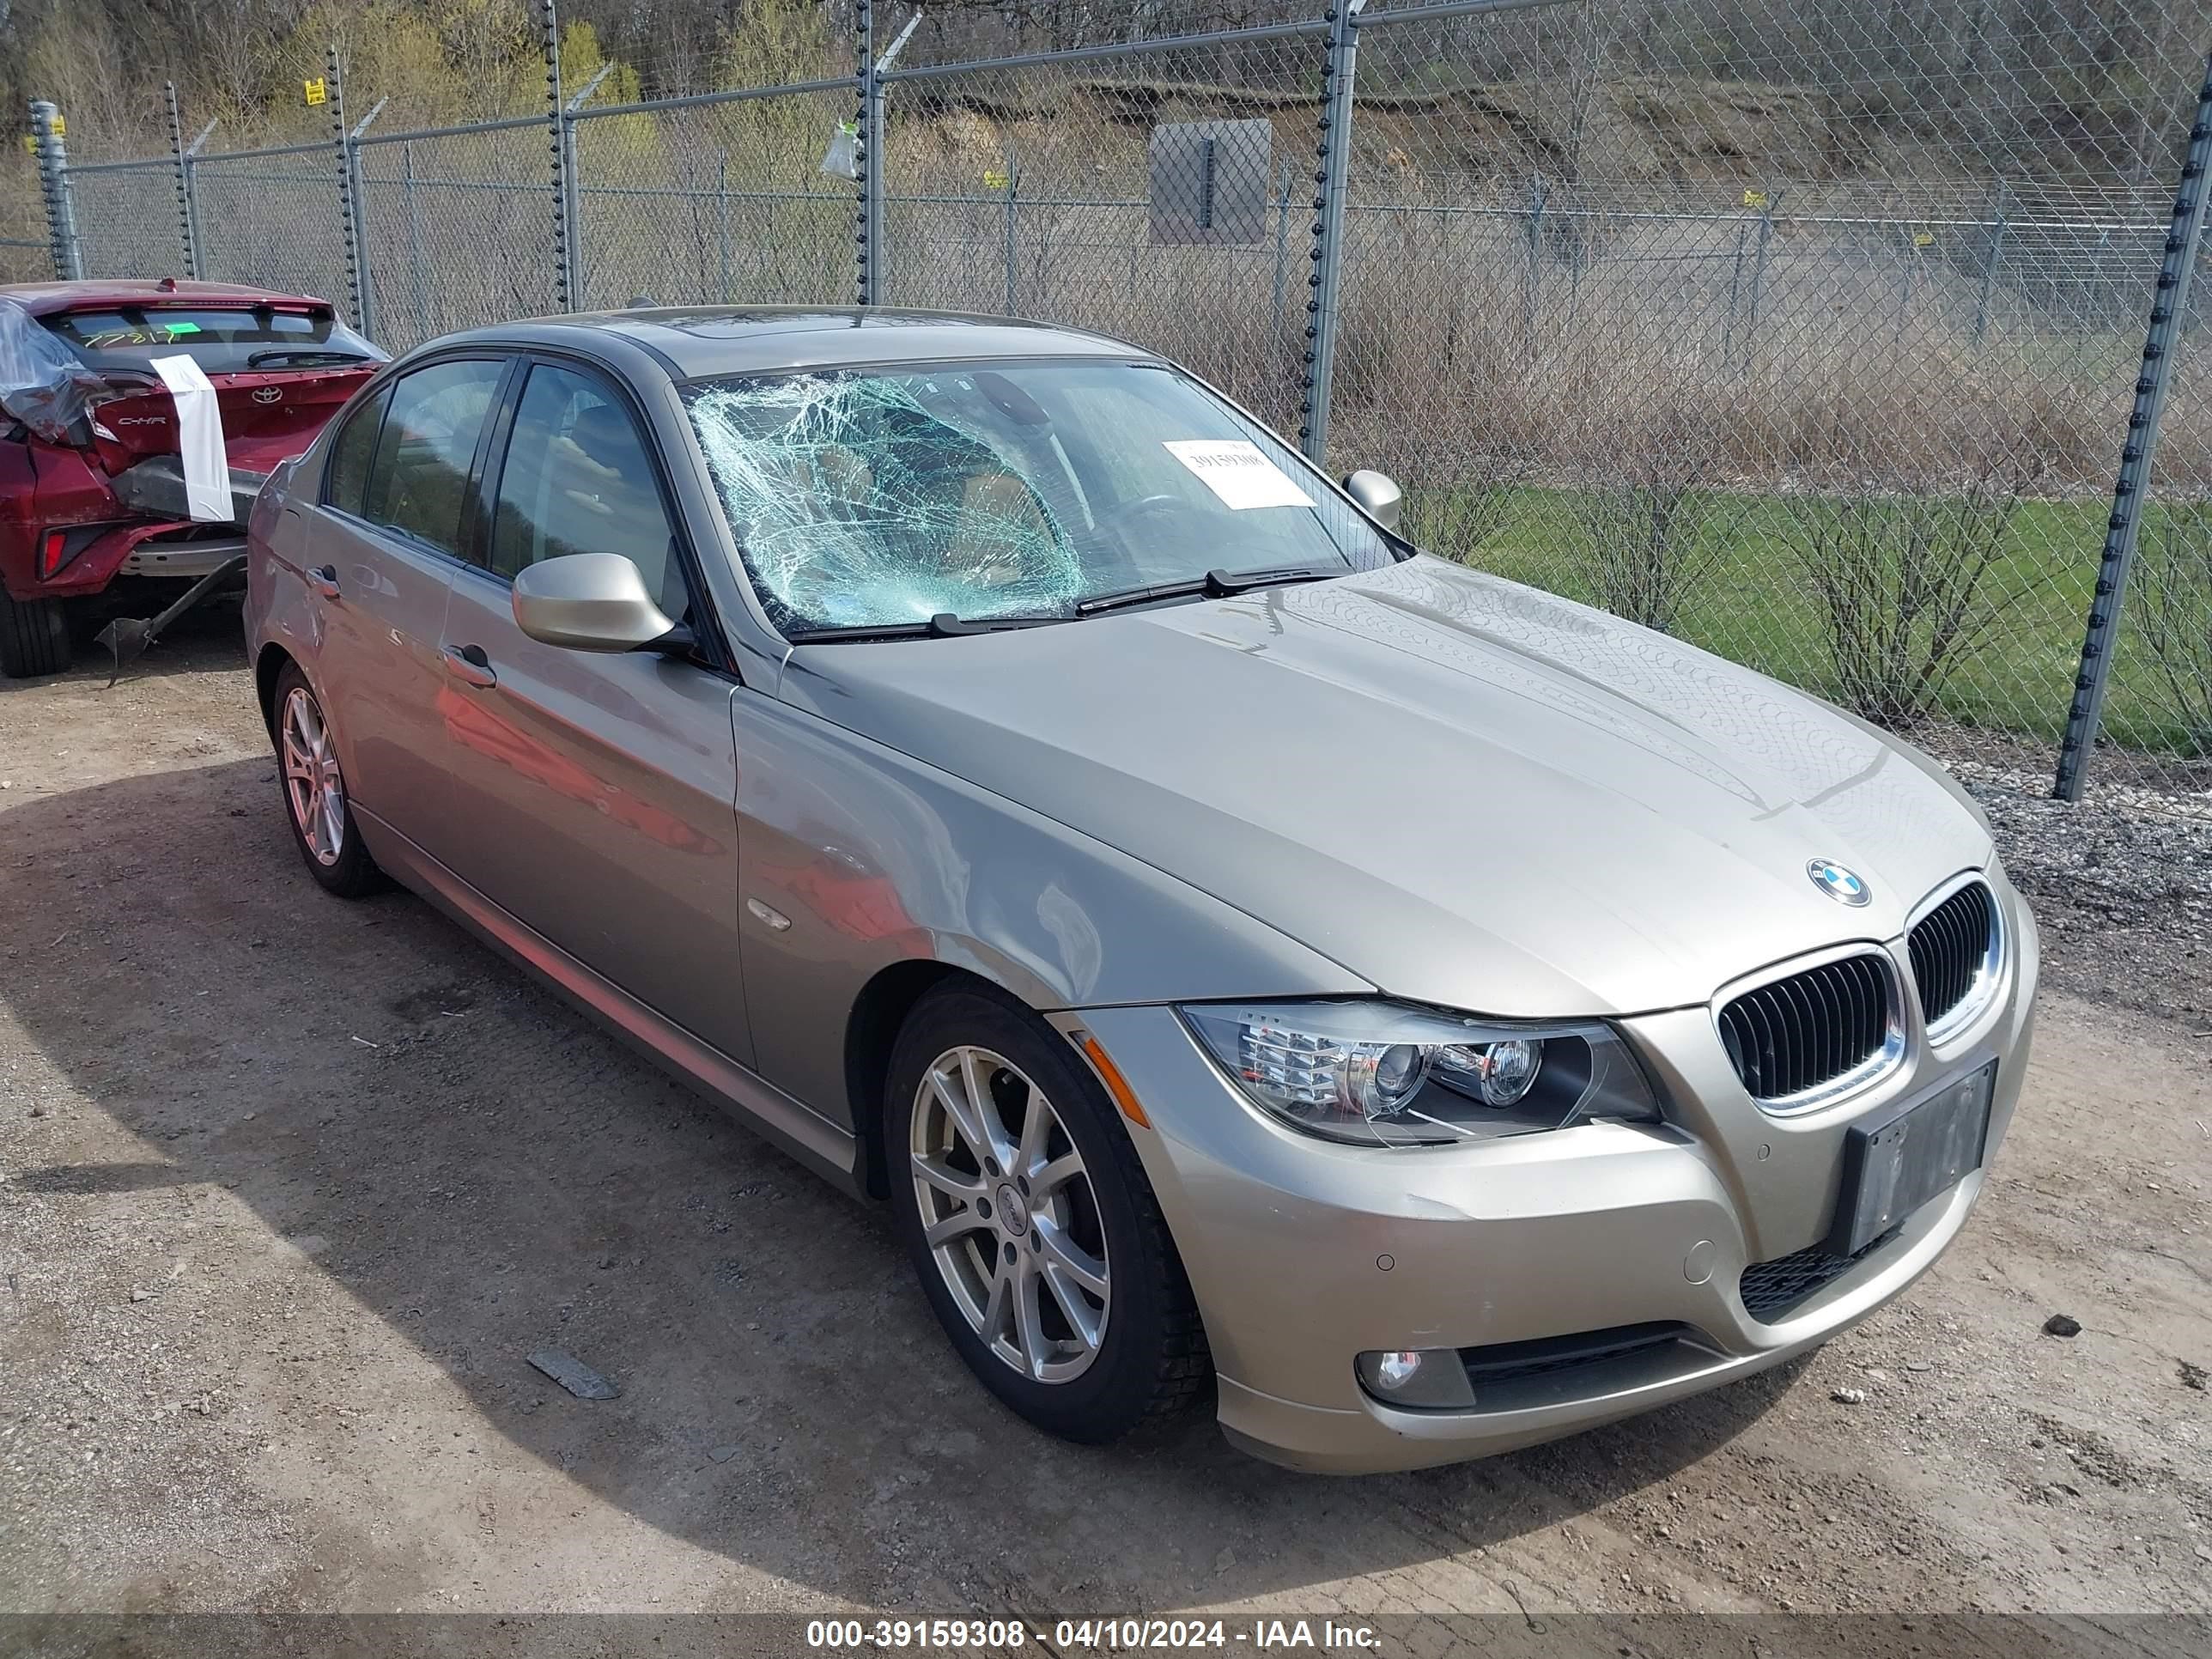 vin: WBAPH77529NM46911 WBAPH77529NM46911 2009 bmw 3er 3000 for Sale in 60118, 605 Healy Road, East Dundee, Illinois, USA